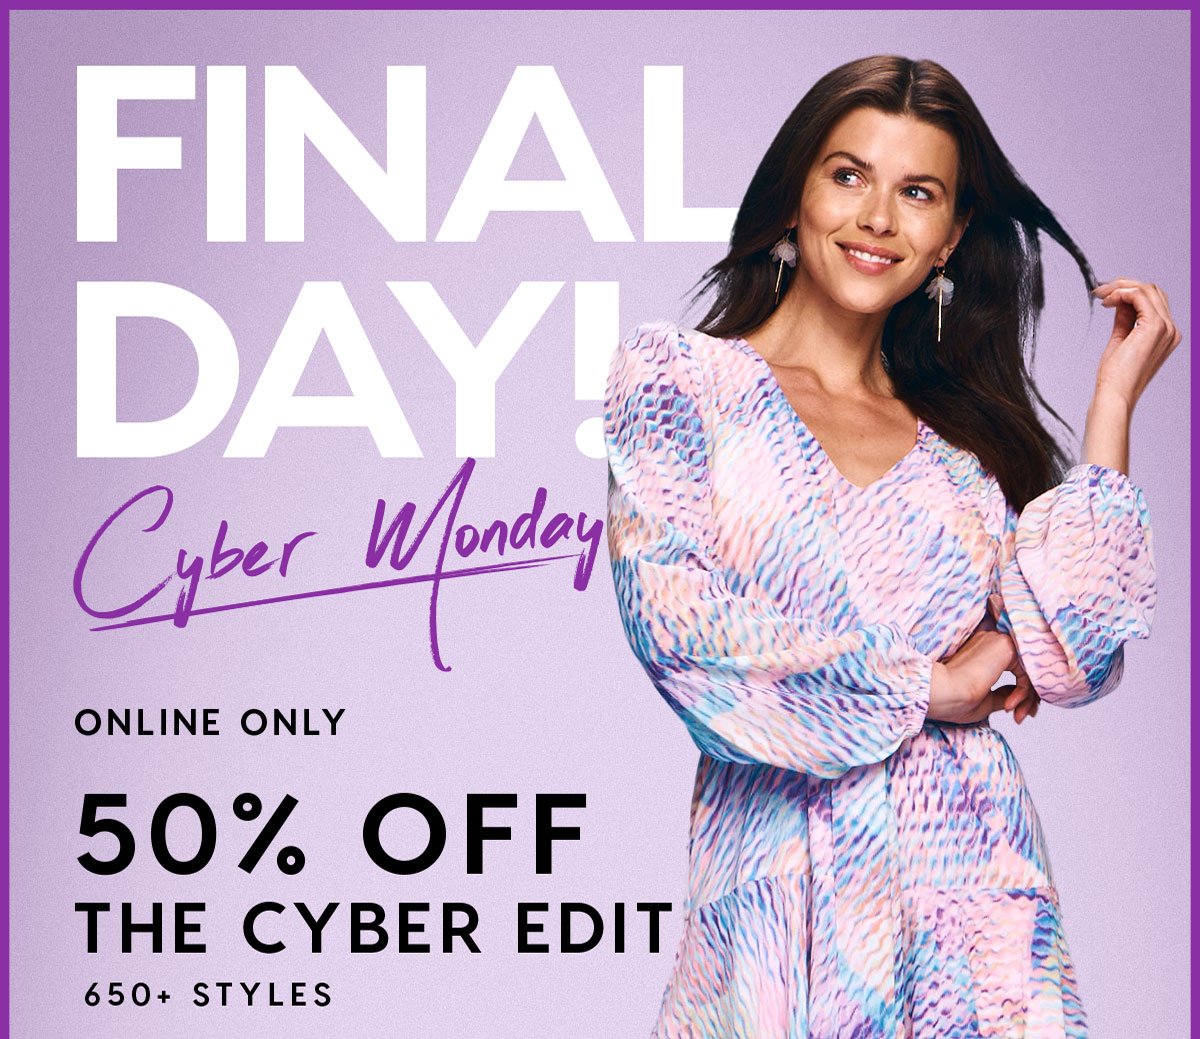 FINAL DAY Cyber Monday Online Only 50% Off The Cyber Edit 650+ Styles